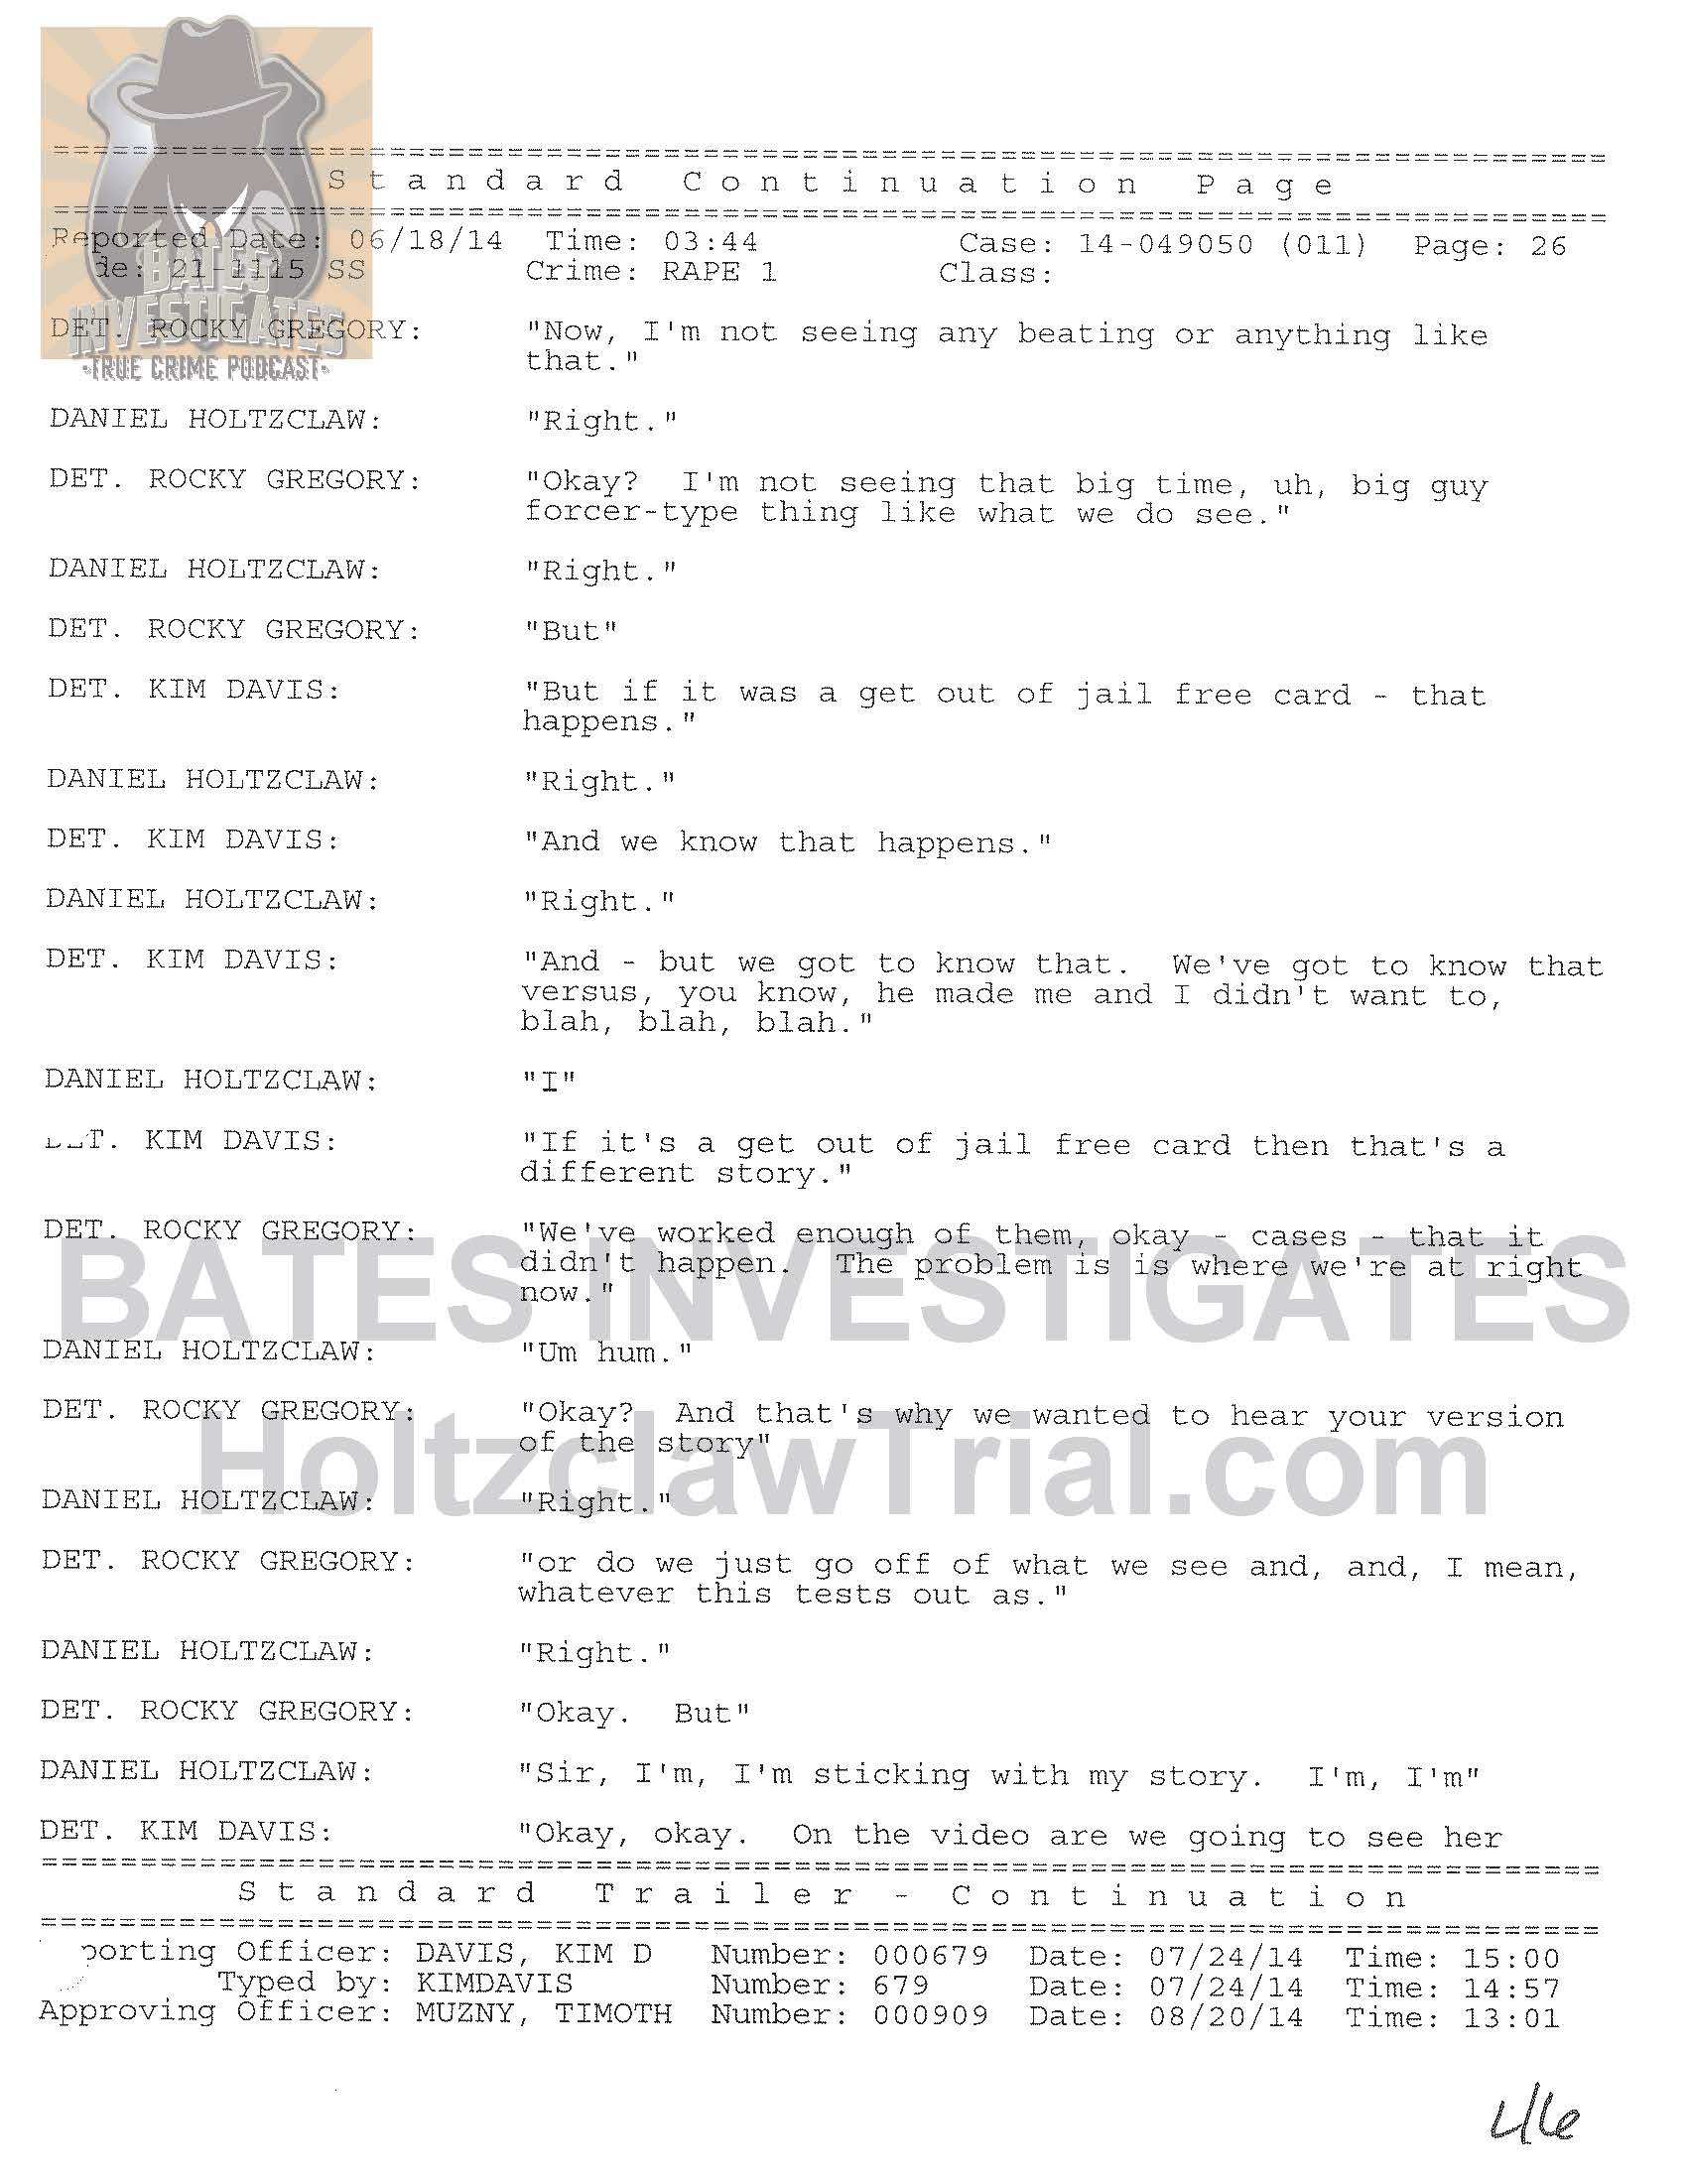 Holtzclaw Interrogation Transcript - Ep02 Redacted_Page_26.jpg